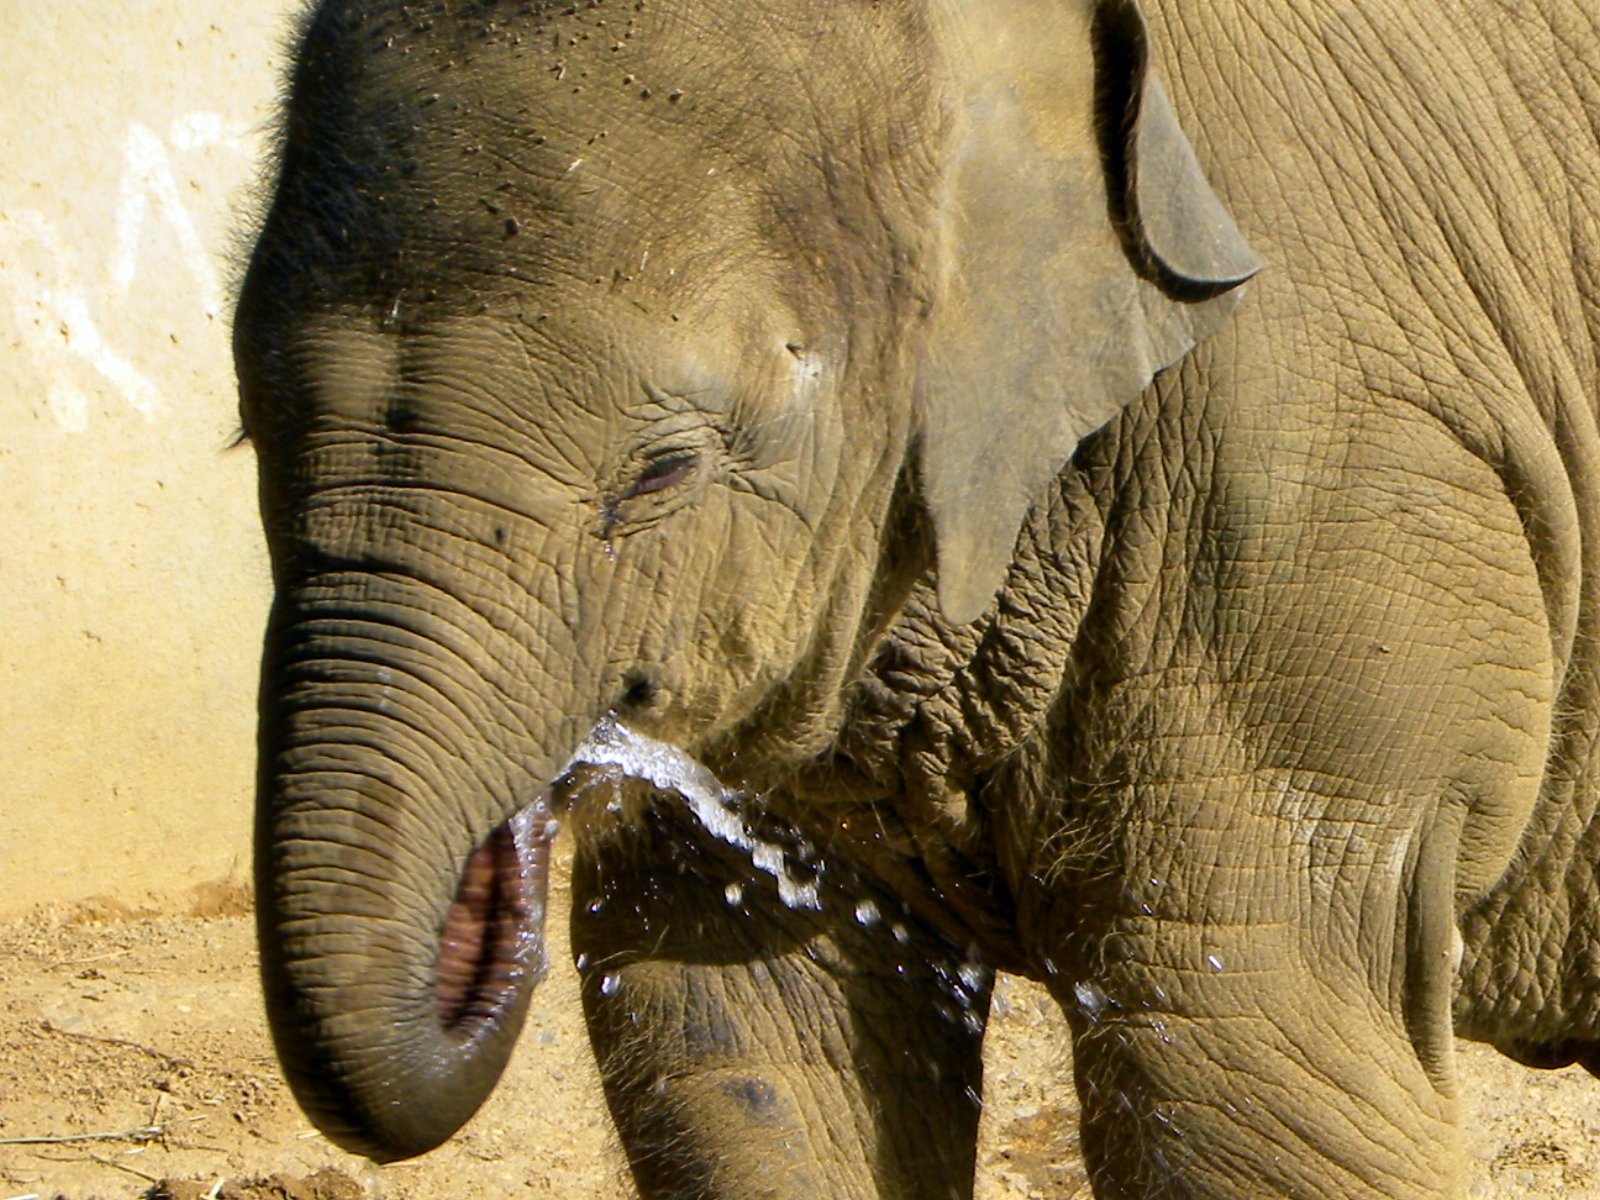 the small elephant is washing itself with water